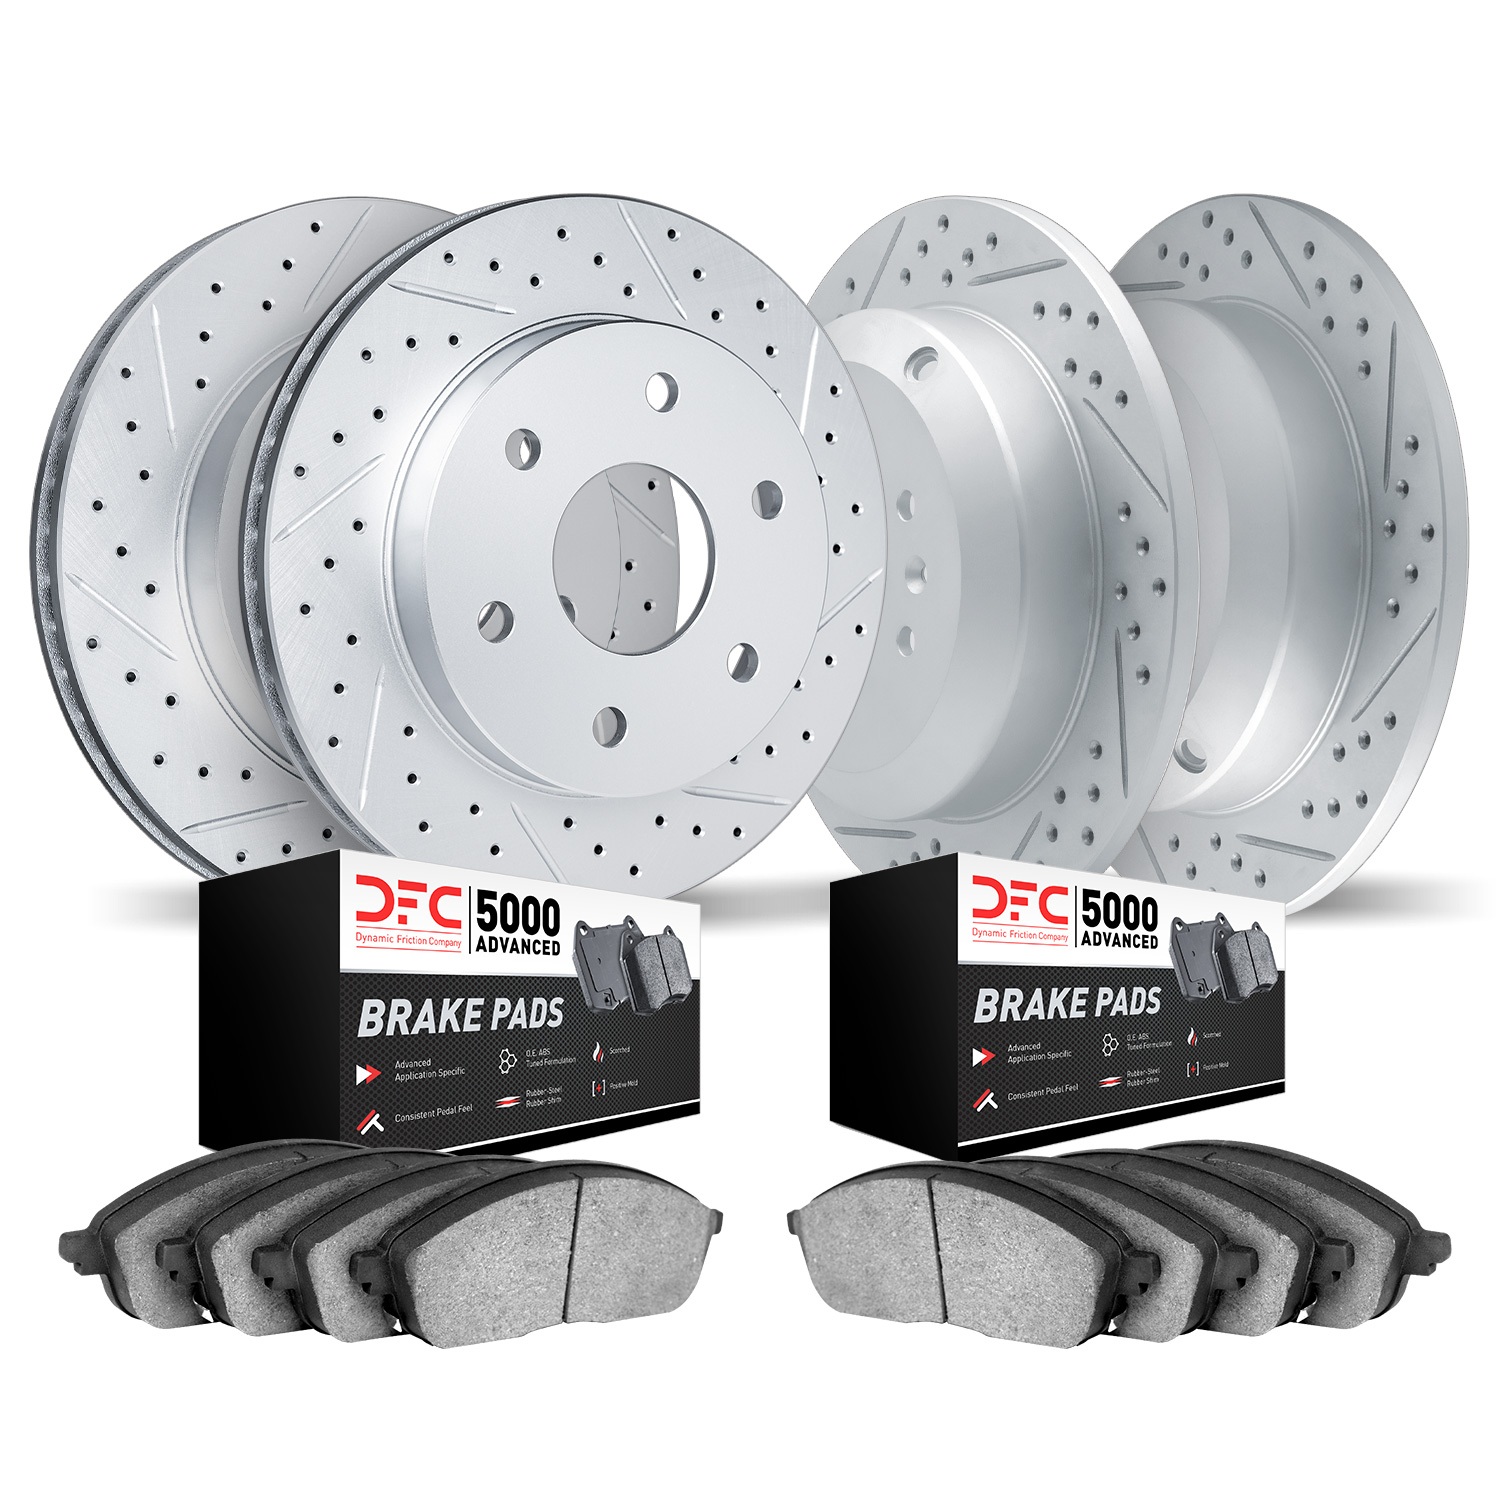 2504-52009 Geoperformance Drilled/Slotted Rotors w/5000 Advanced Brake Pads Kit, 2006-2006 GM, Position: Front and Rear